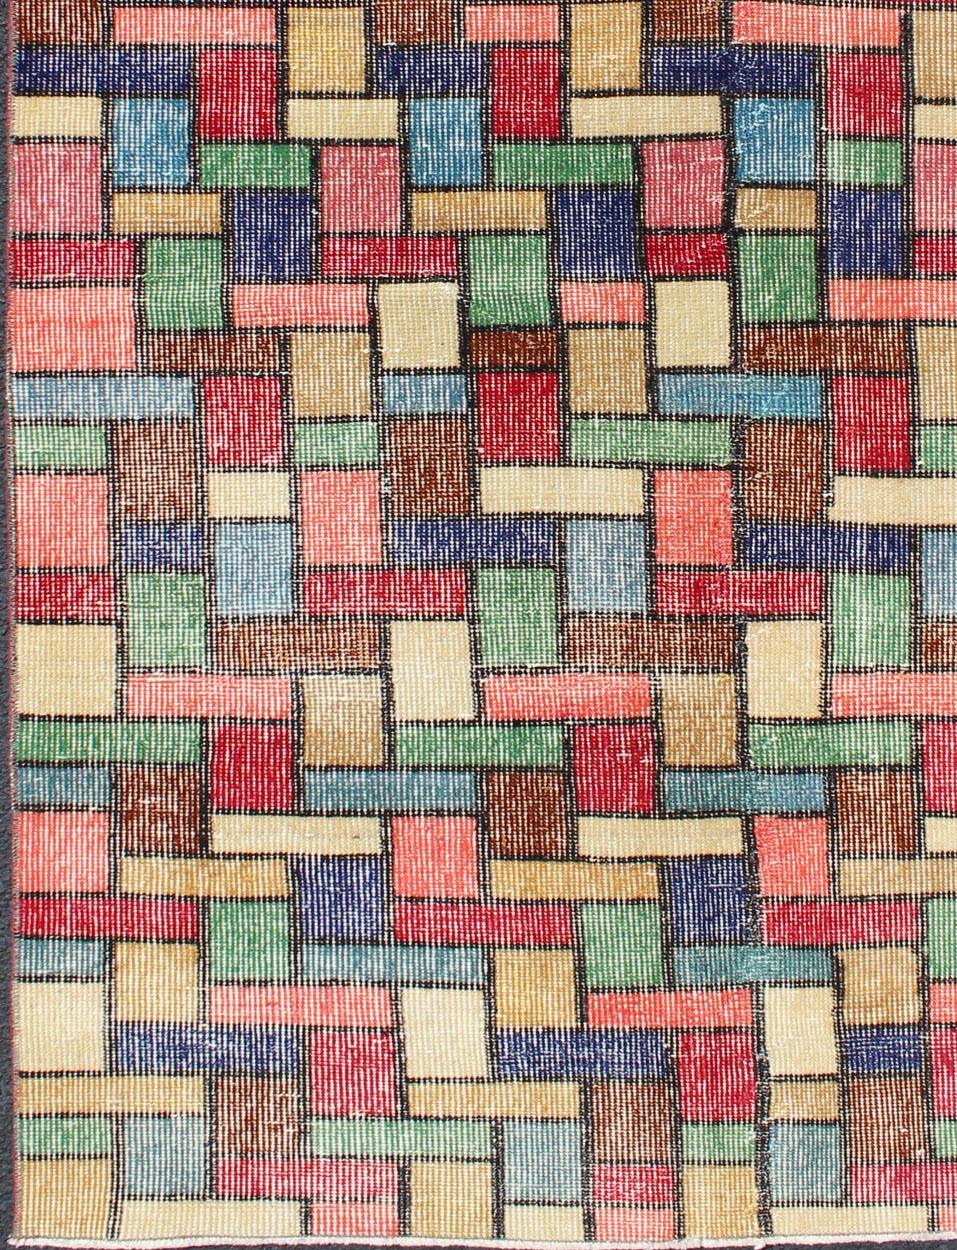 Vintage Rug with a Modern Design with Multi Colors in Square and Rectangular shapes, Keivan Woven Arts / Rug/TU-MTU-3360. Mid century modern.

This vintage rug with a Mid-Century design demonstrates a band of color surrounded by a defined contour.